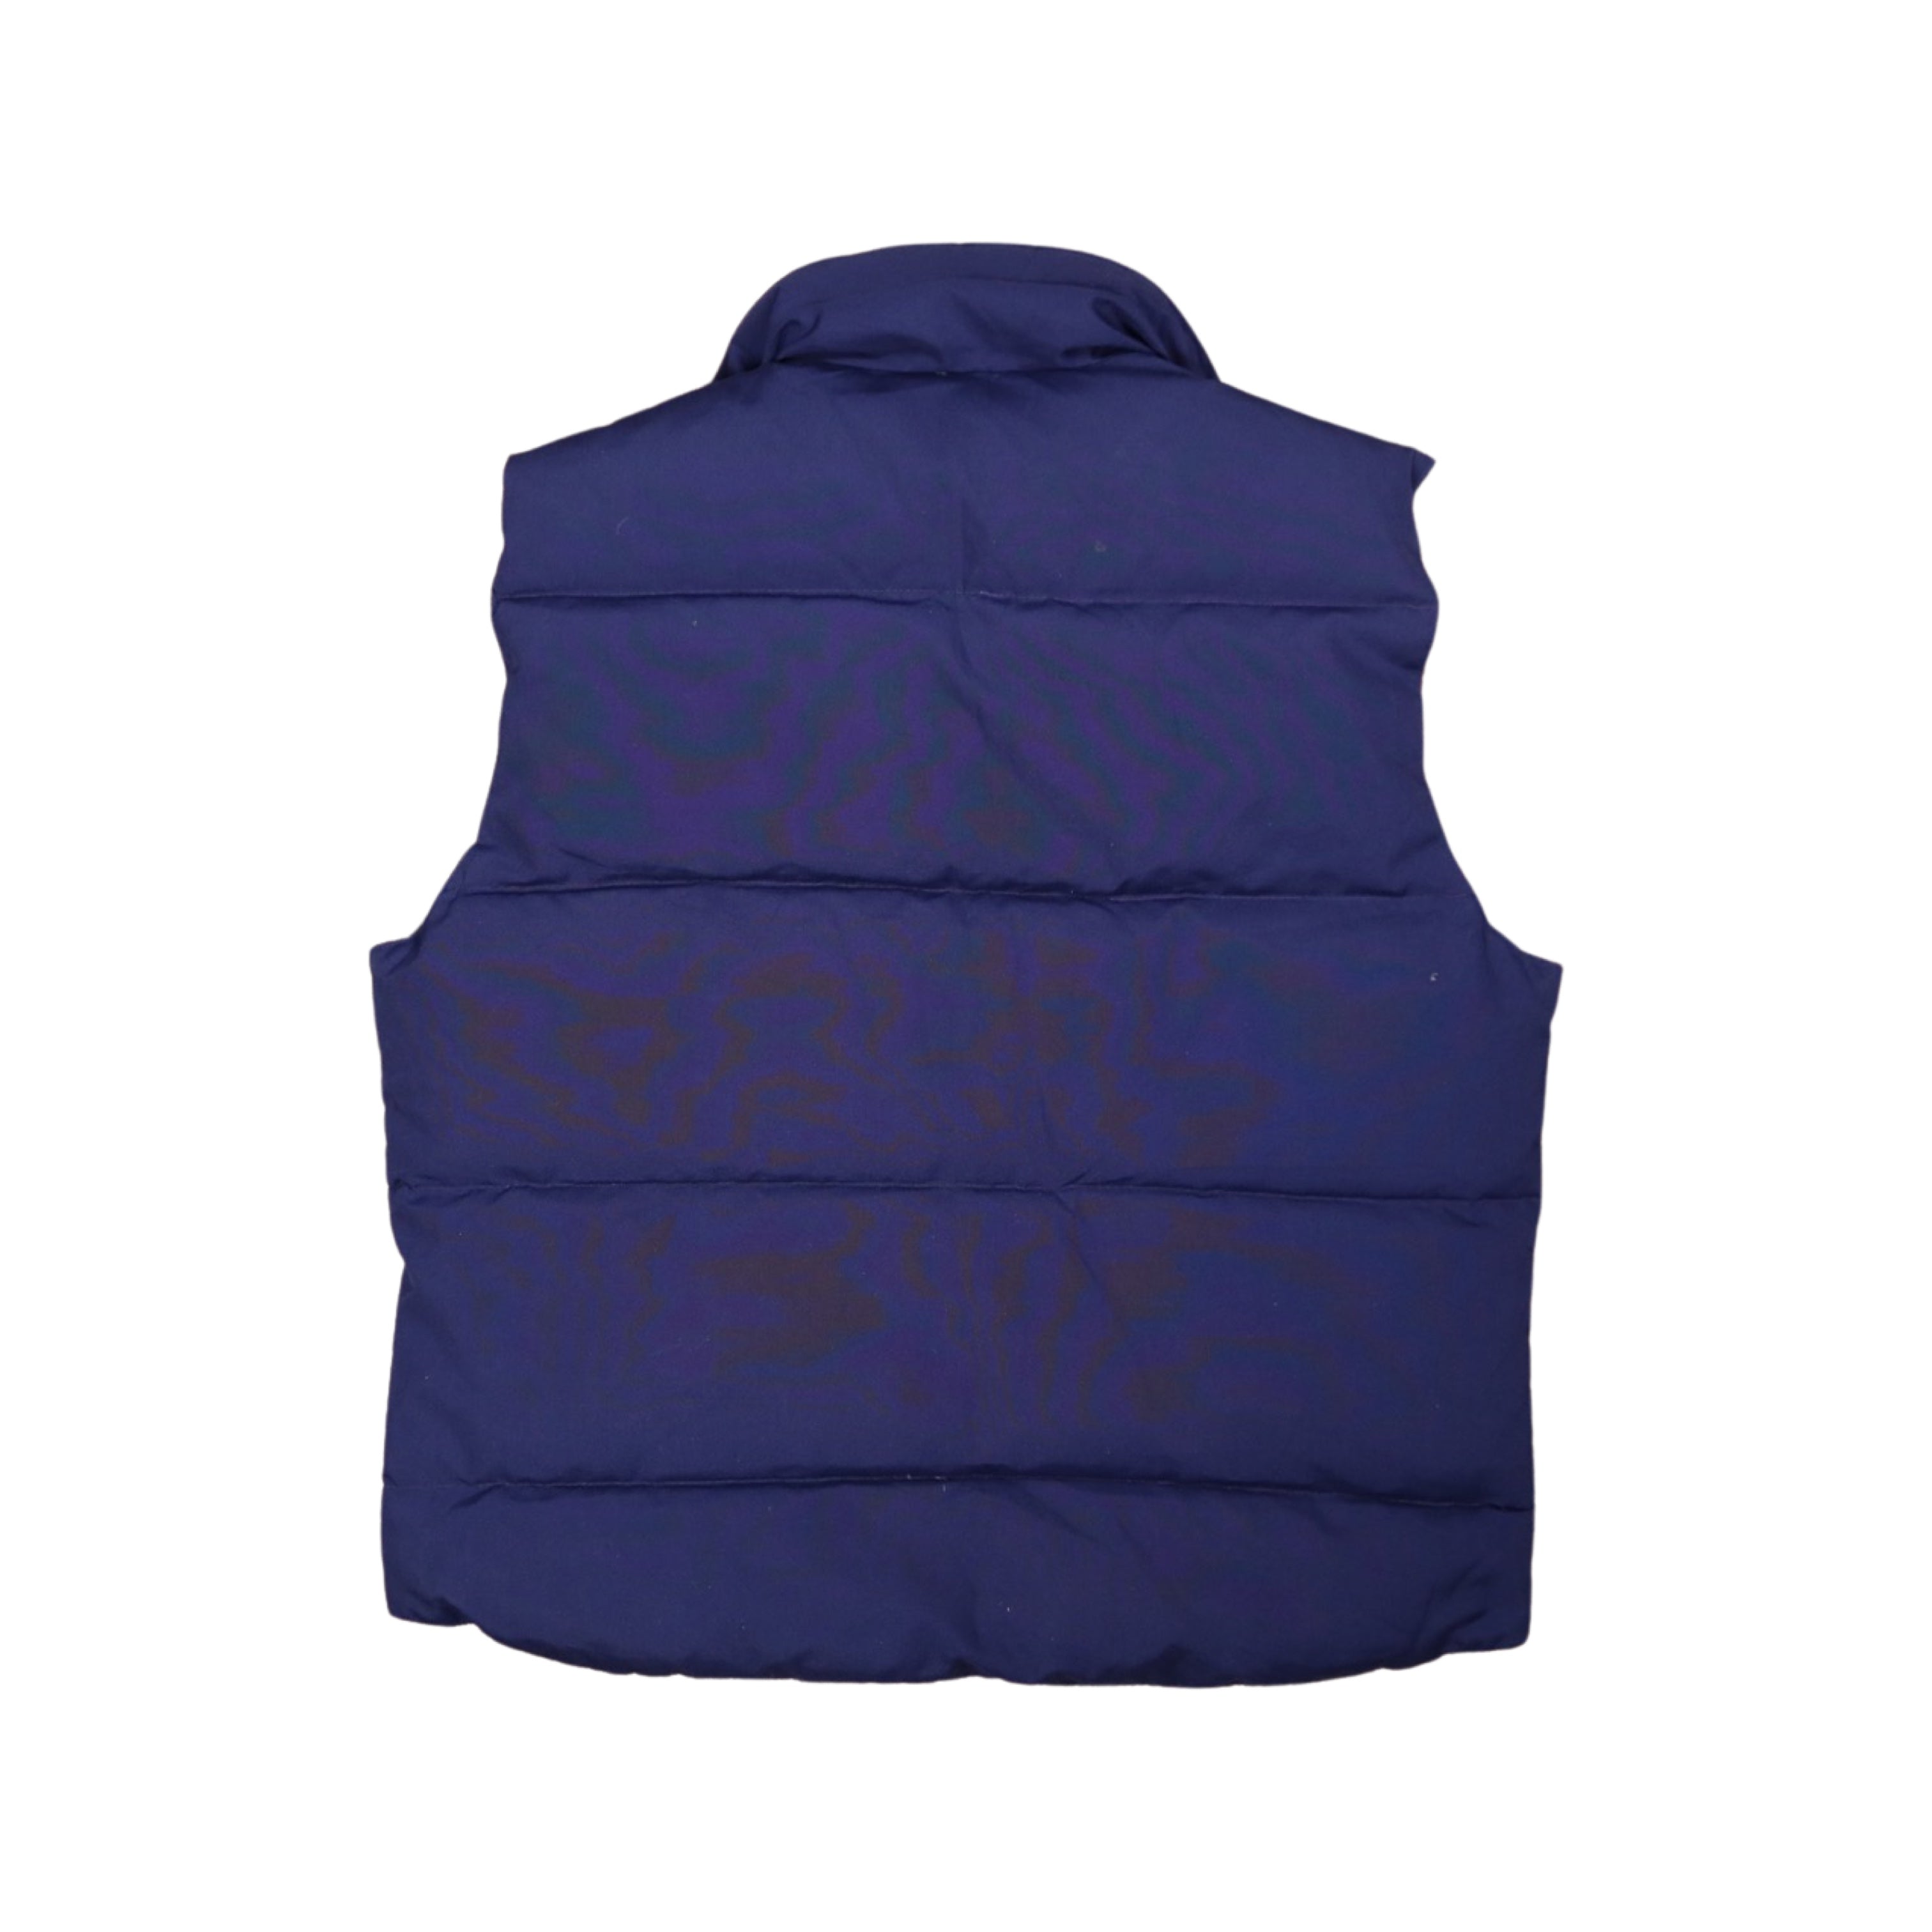 Navy 80s Puffer Vest Essential (Large)